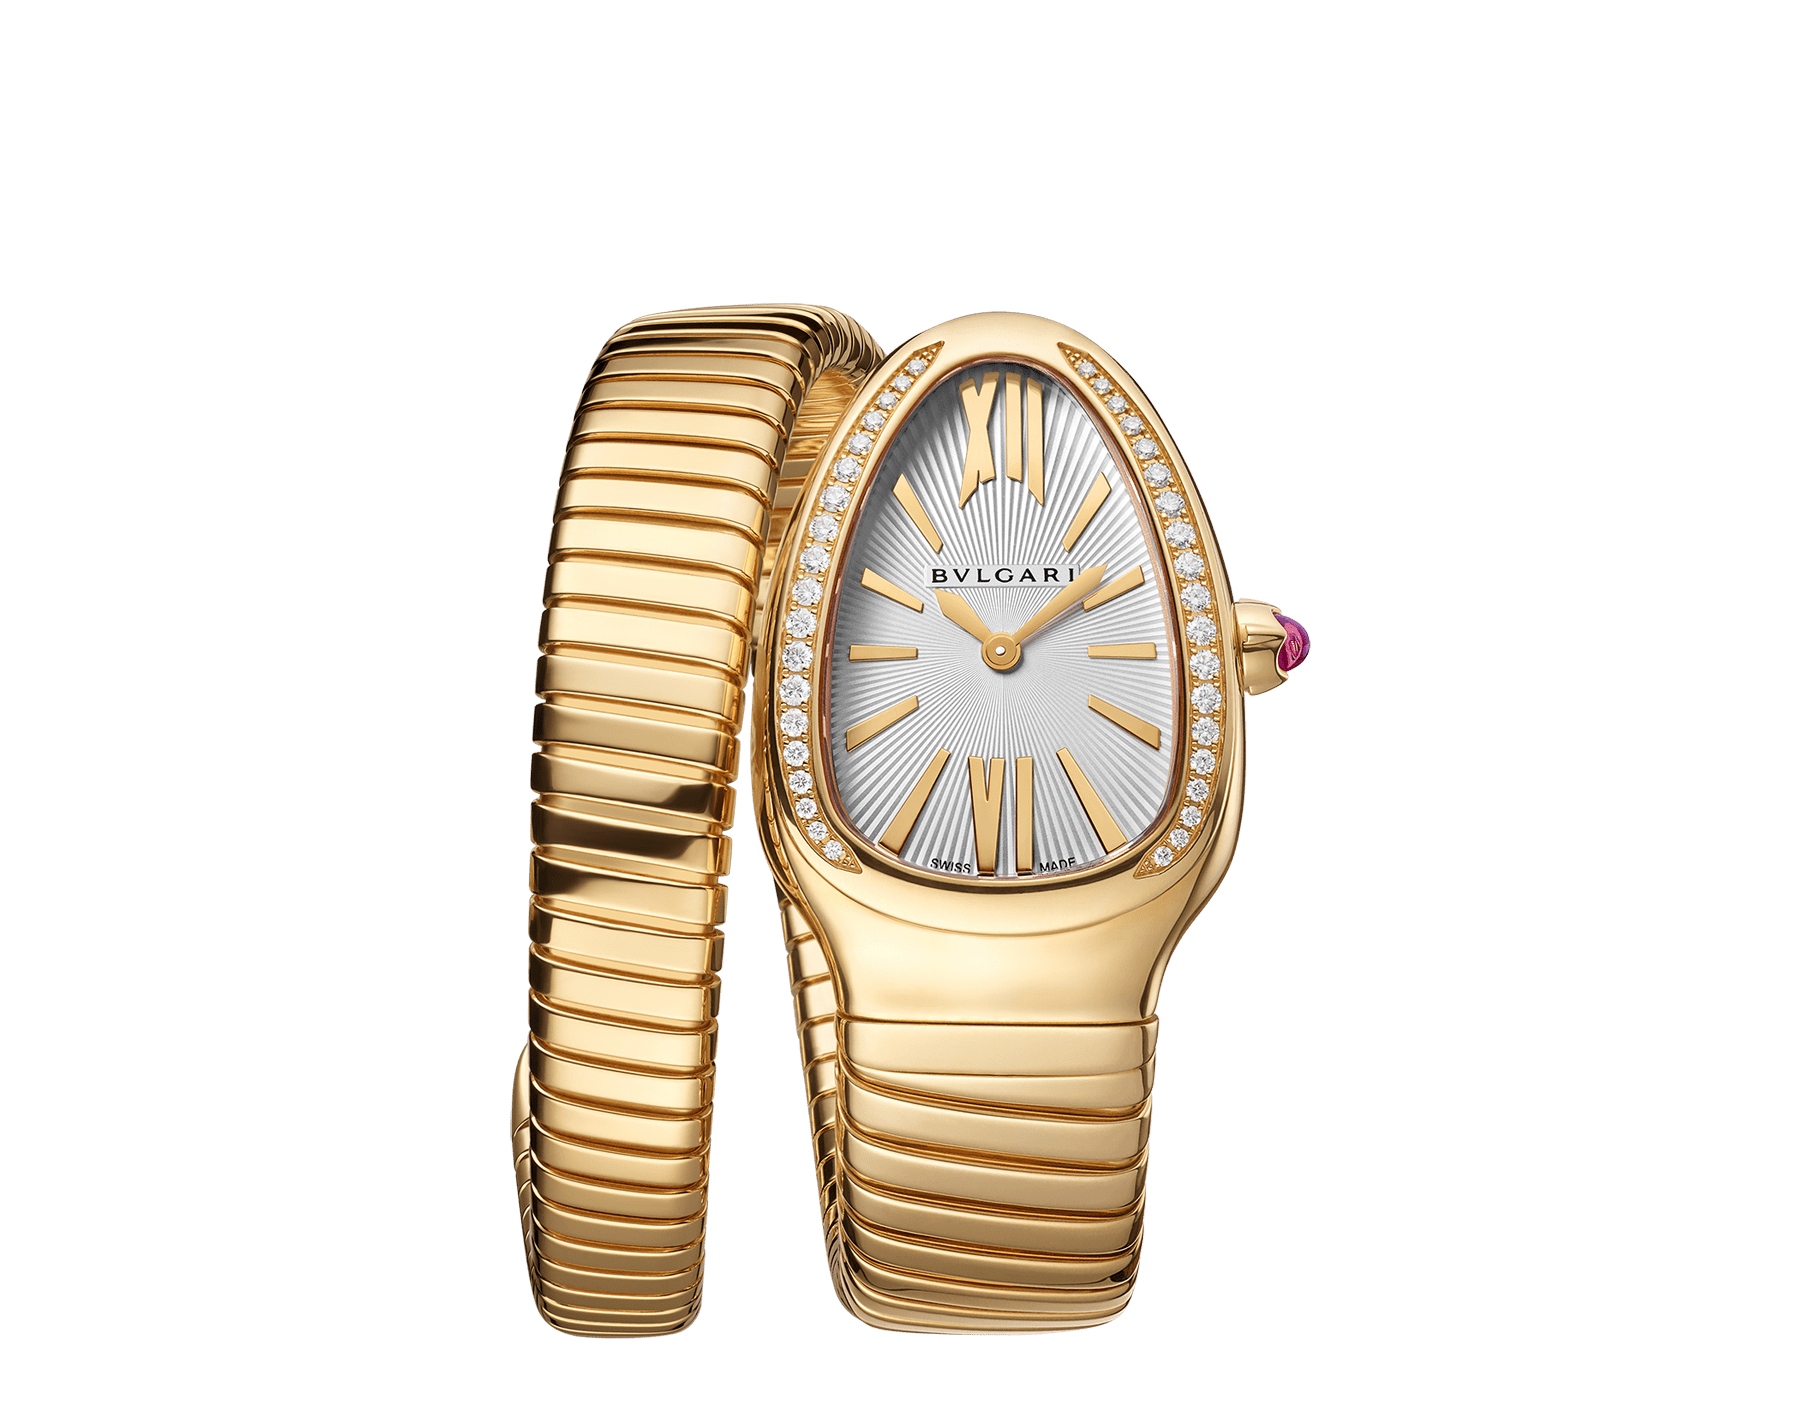 Serpenti Tubogas Lady watch, 35 mm 18 kt yellow gold curved case set with diamonds , 18 kt yellow gold crown set with a cabochon cut pink rubellite , white opaline dial with guilloché soleil treatment and hand-applied indexes, single spiral 18 kt yellow gold bracelet. Quartz movement, hours and minutes functions. Water proof 30 m. 101924 image 1